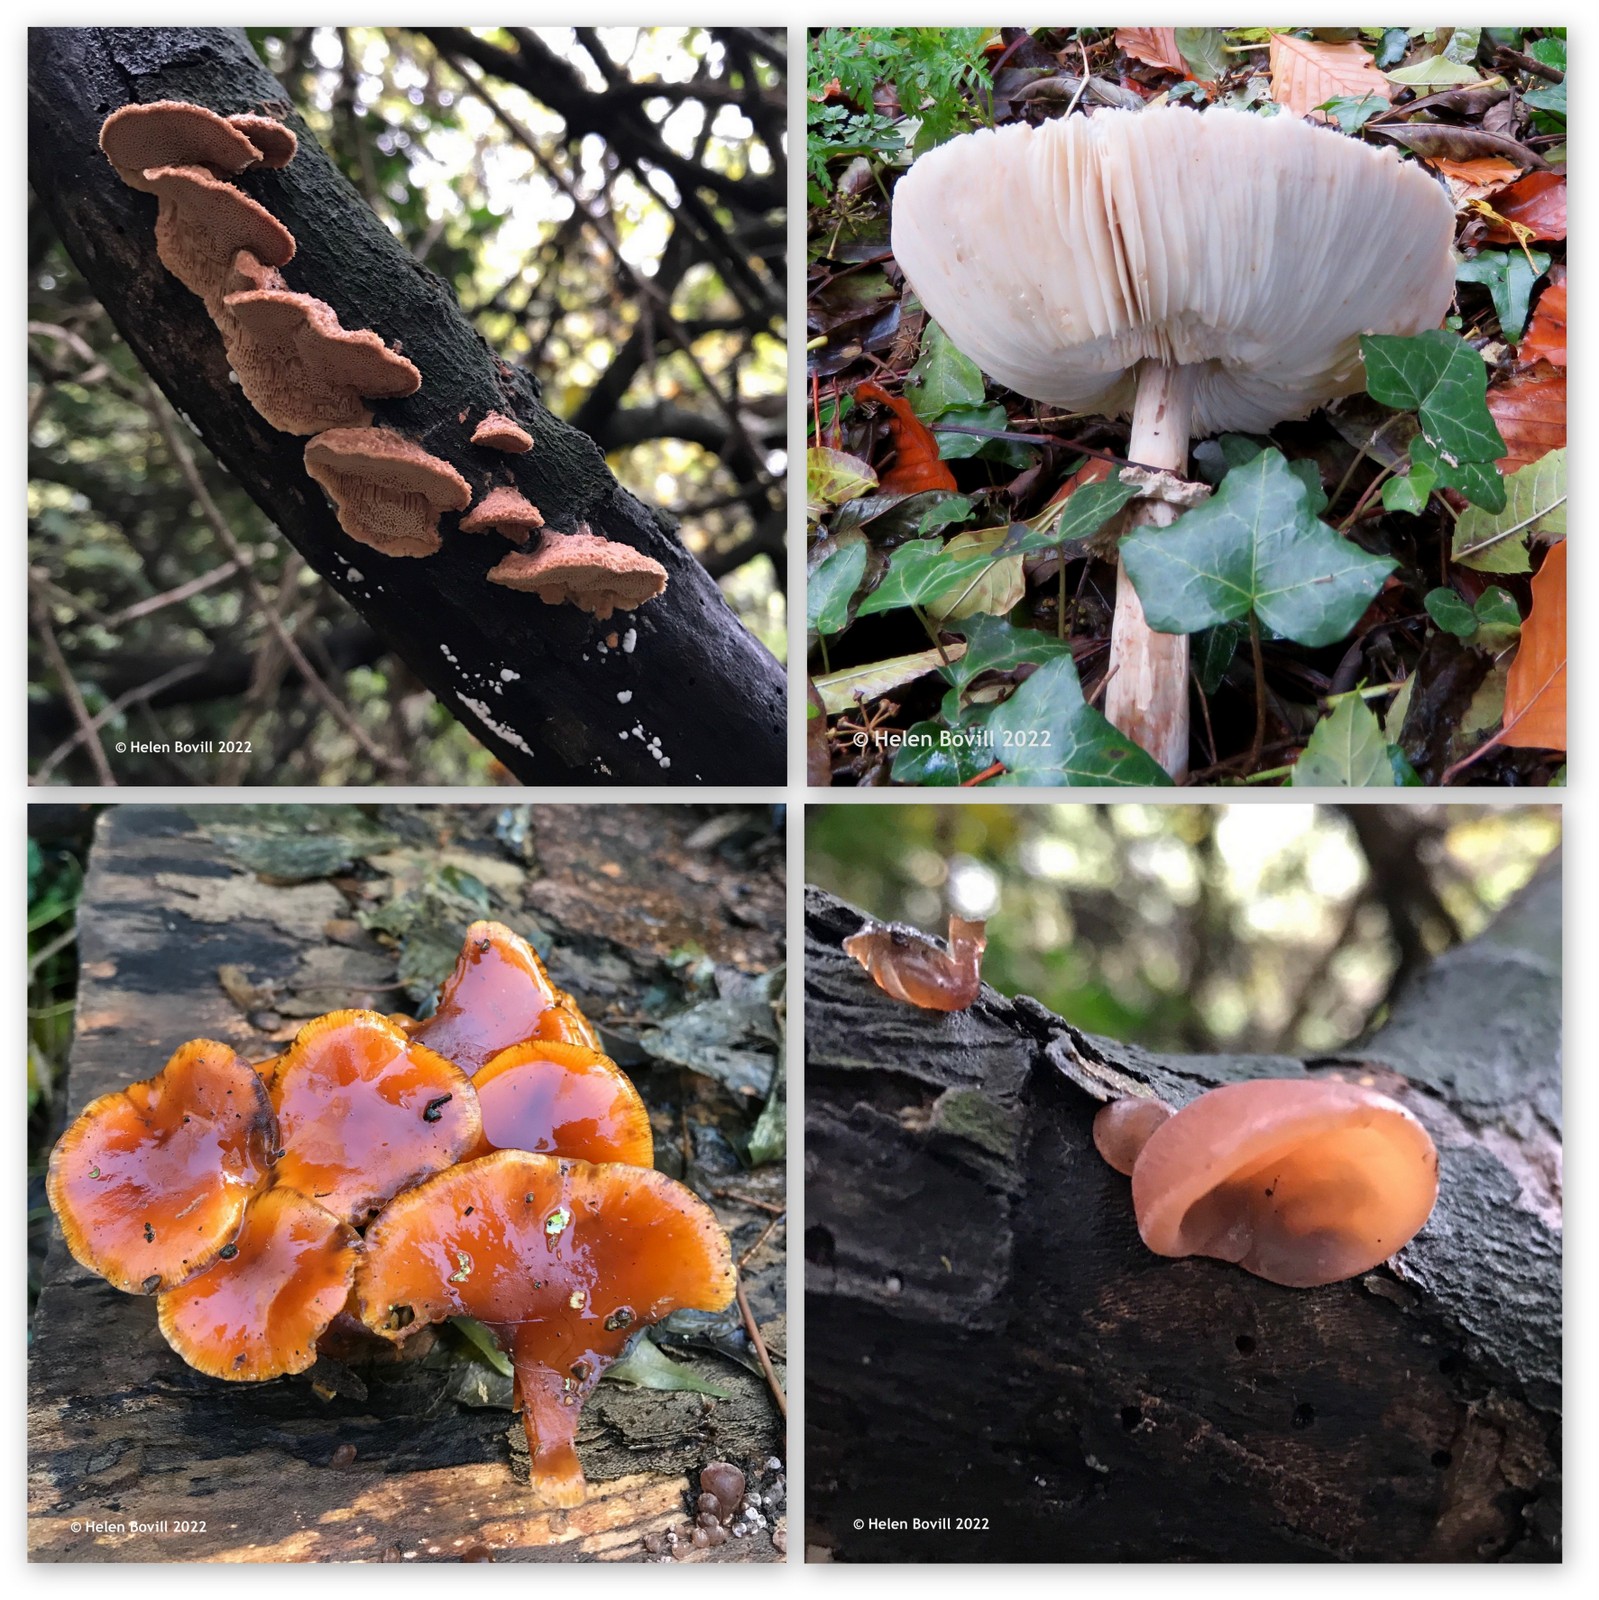 A selection of fungi, some nibbled by the cemetery wildlife